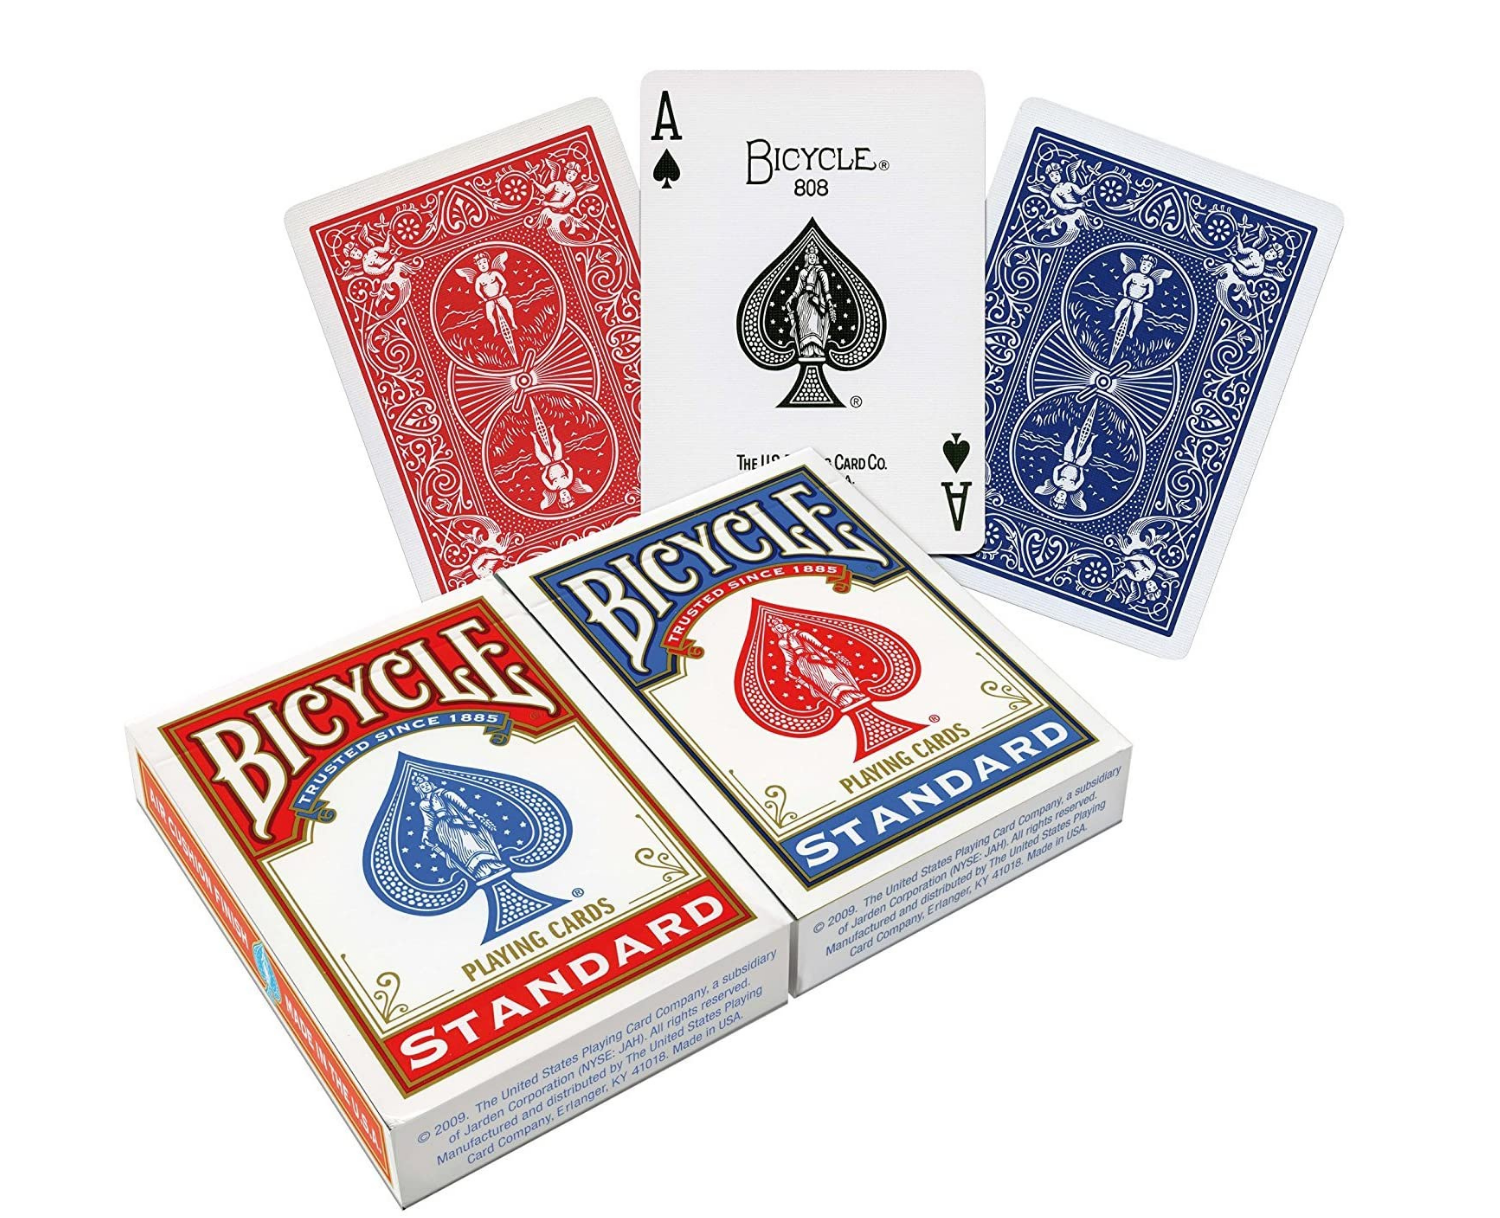 Bicycle cards for device free moments